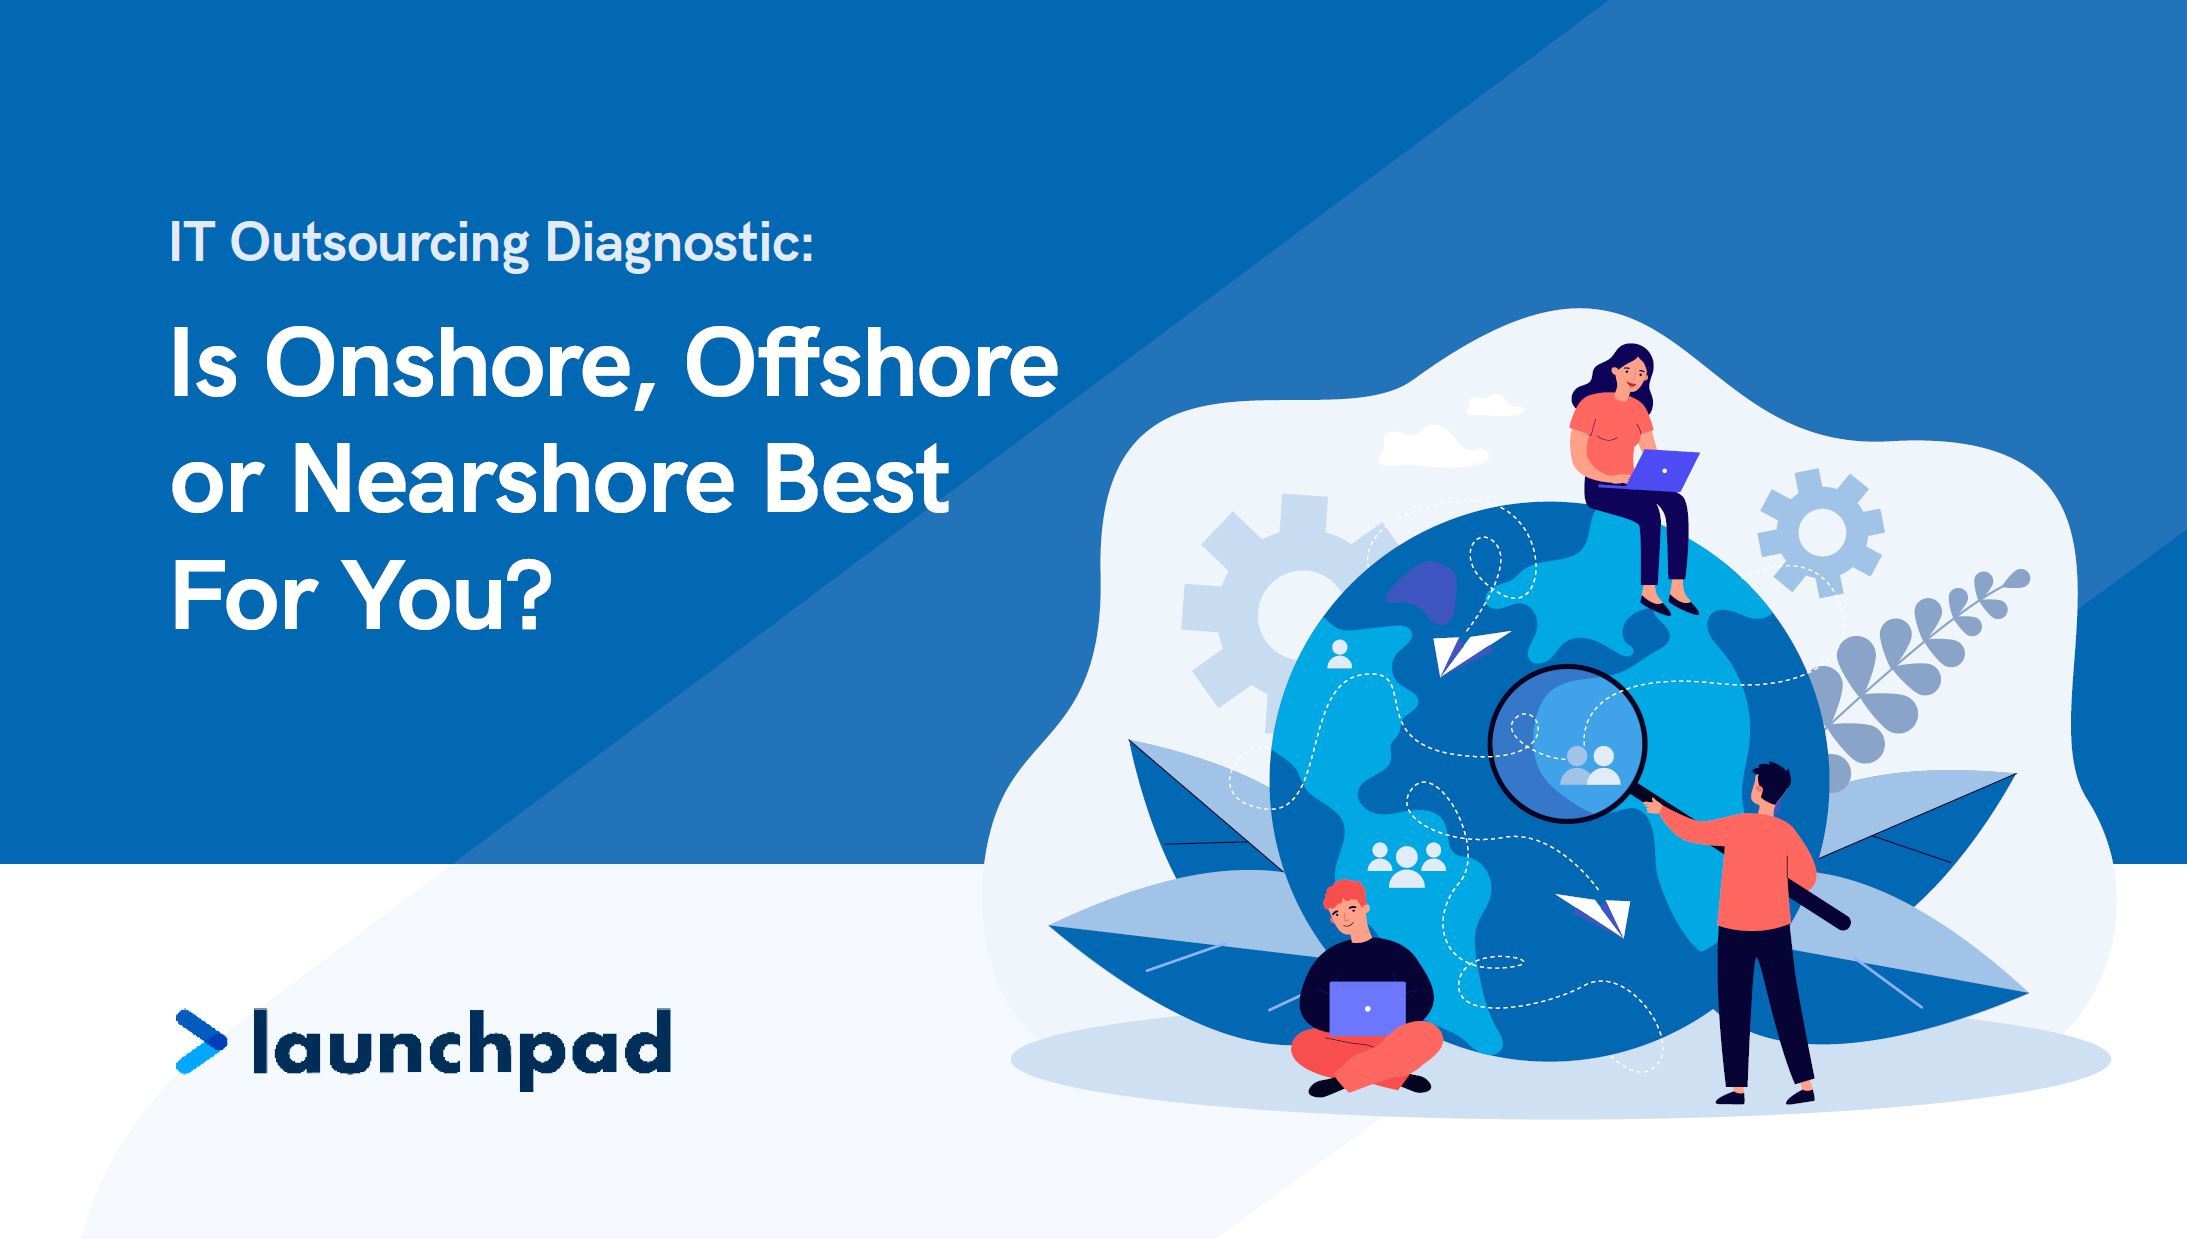 Onshore, Offshore or Nearshore IT Outsourcing? 7 Factors for IT Leaders to Consider